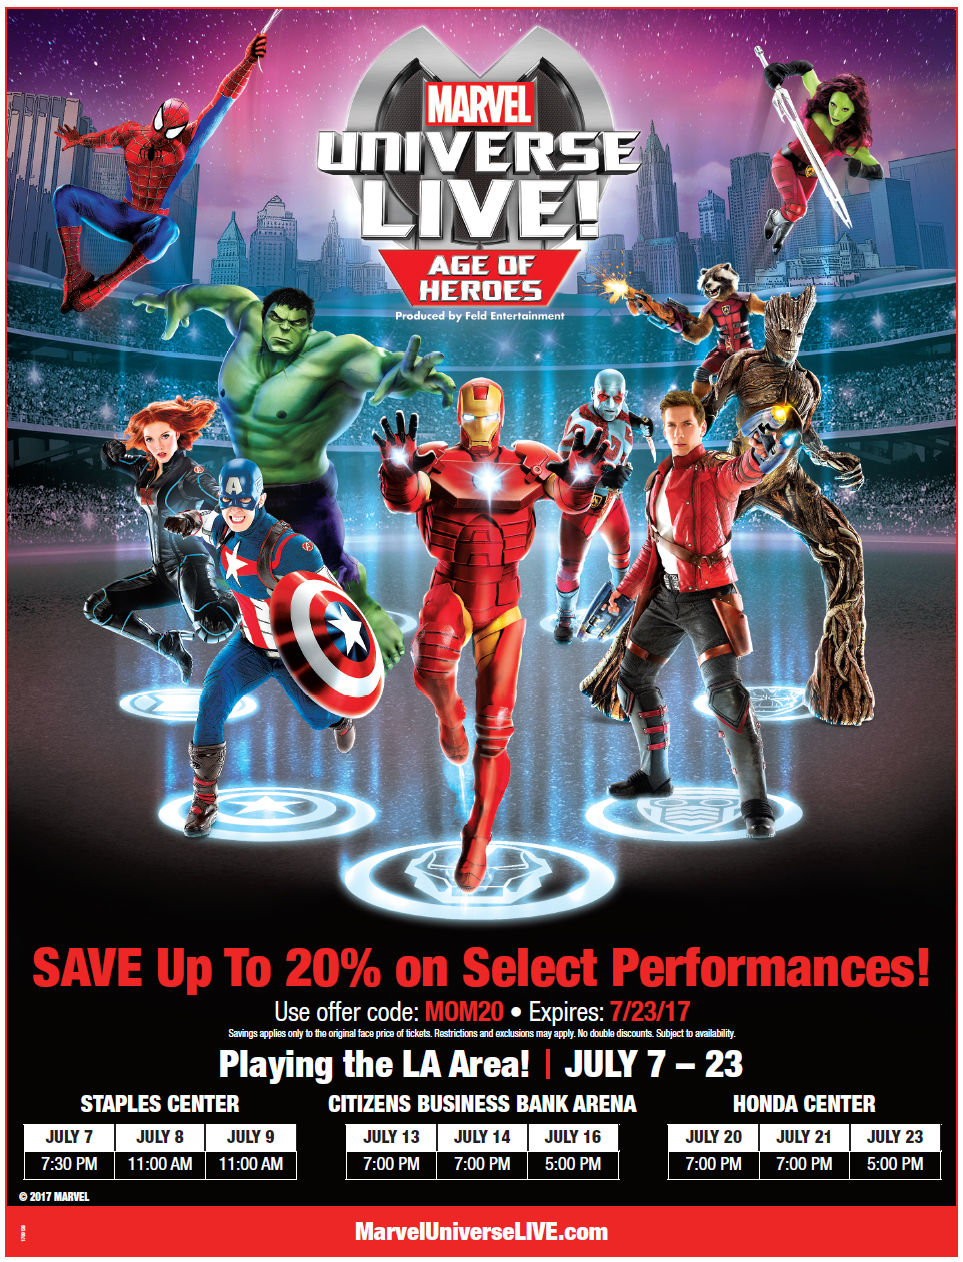 SoCal Blog: MARVEL UNIVERSE LIVE! AGE OF HEROES - TICKET DISCOUNT